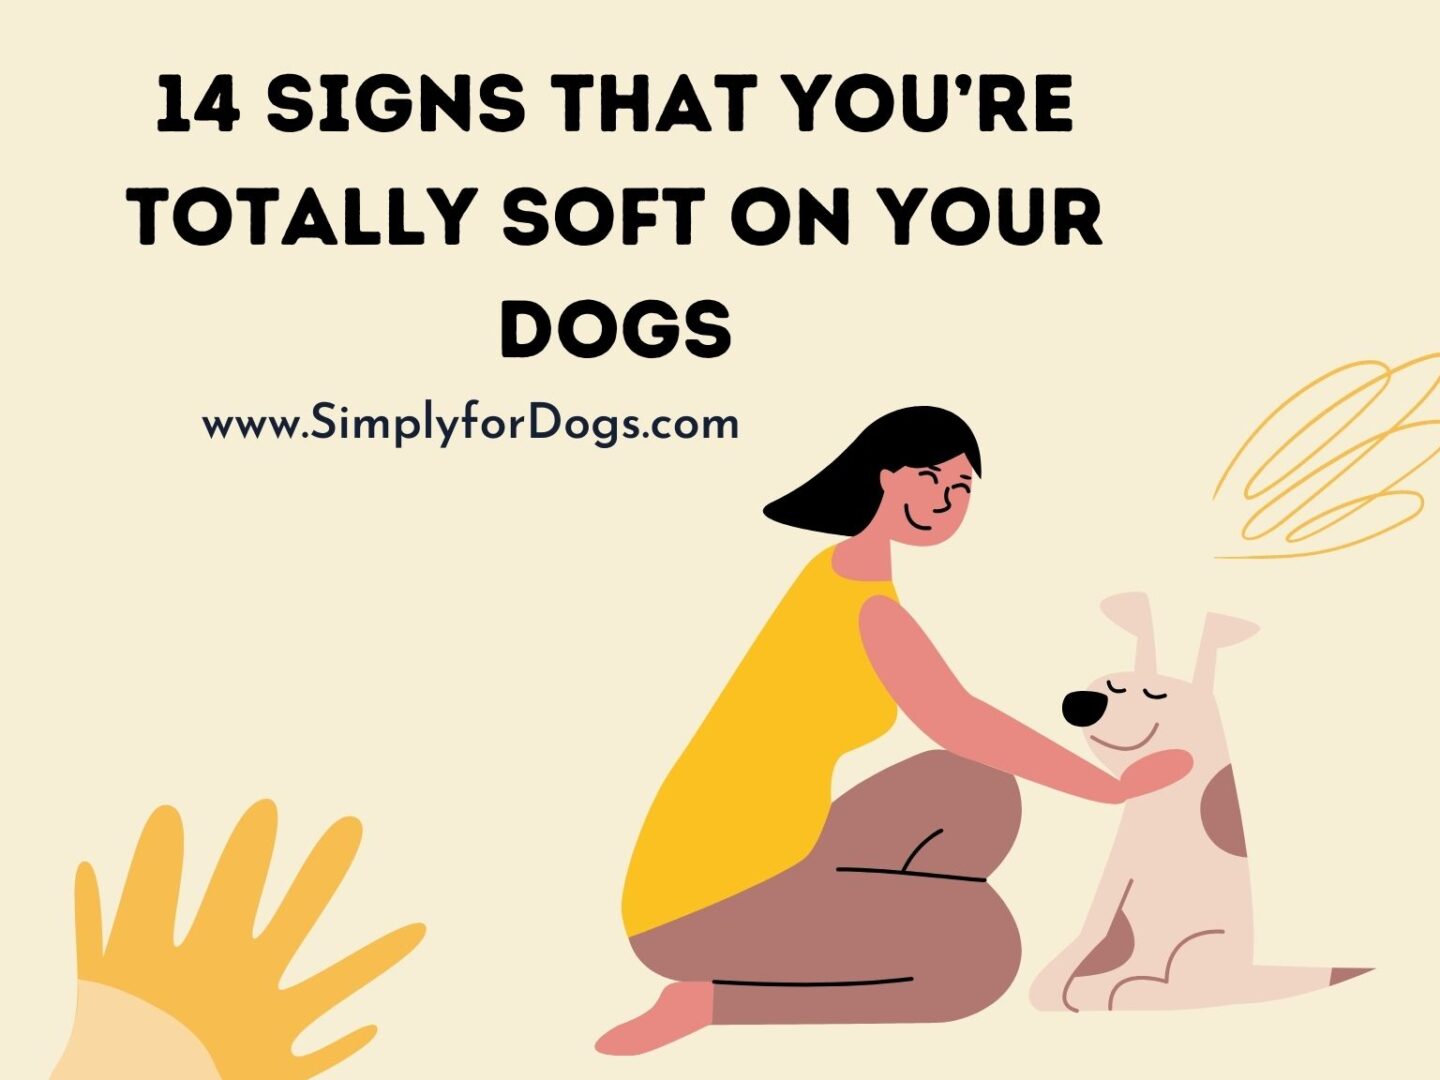 14 Signs that you’re Totally Soft on Your Dogs